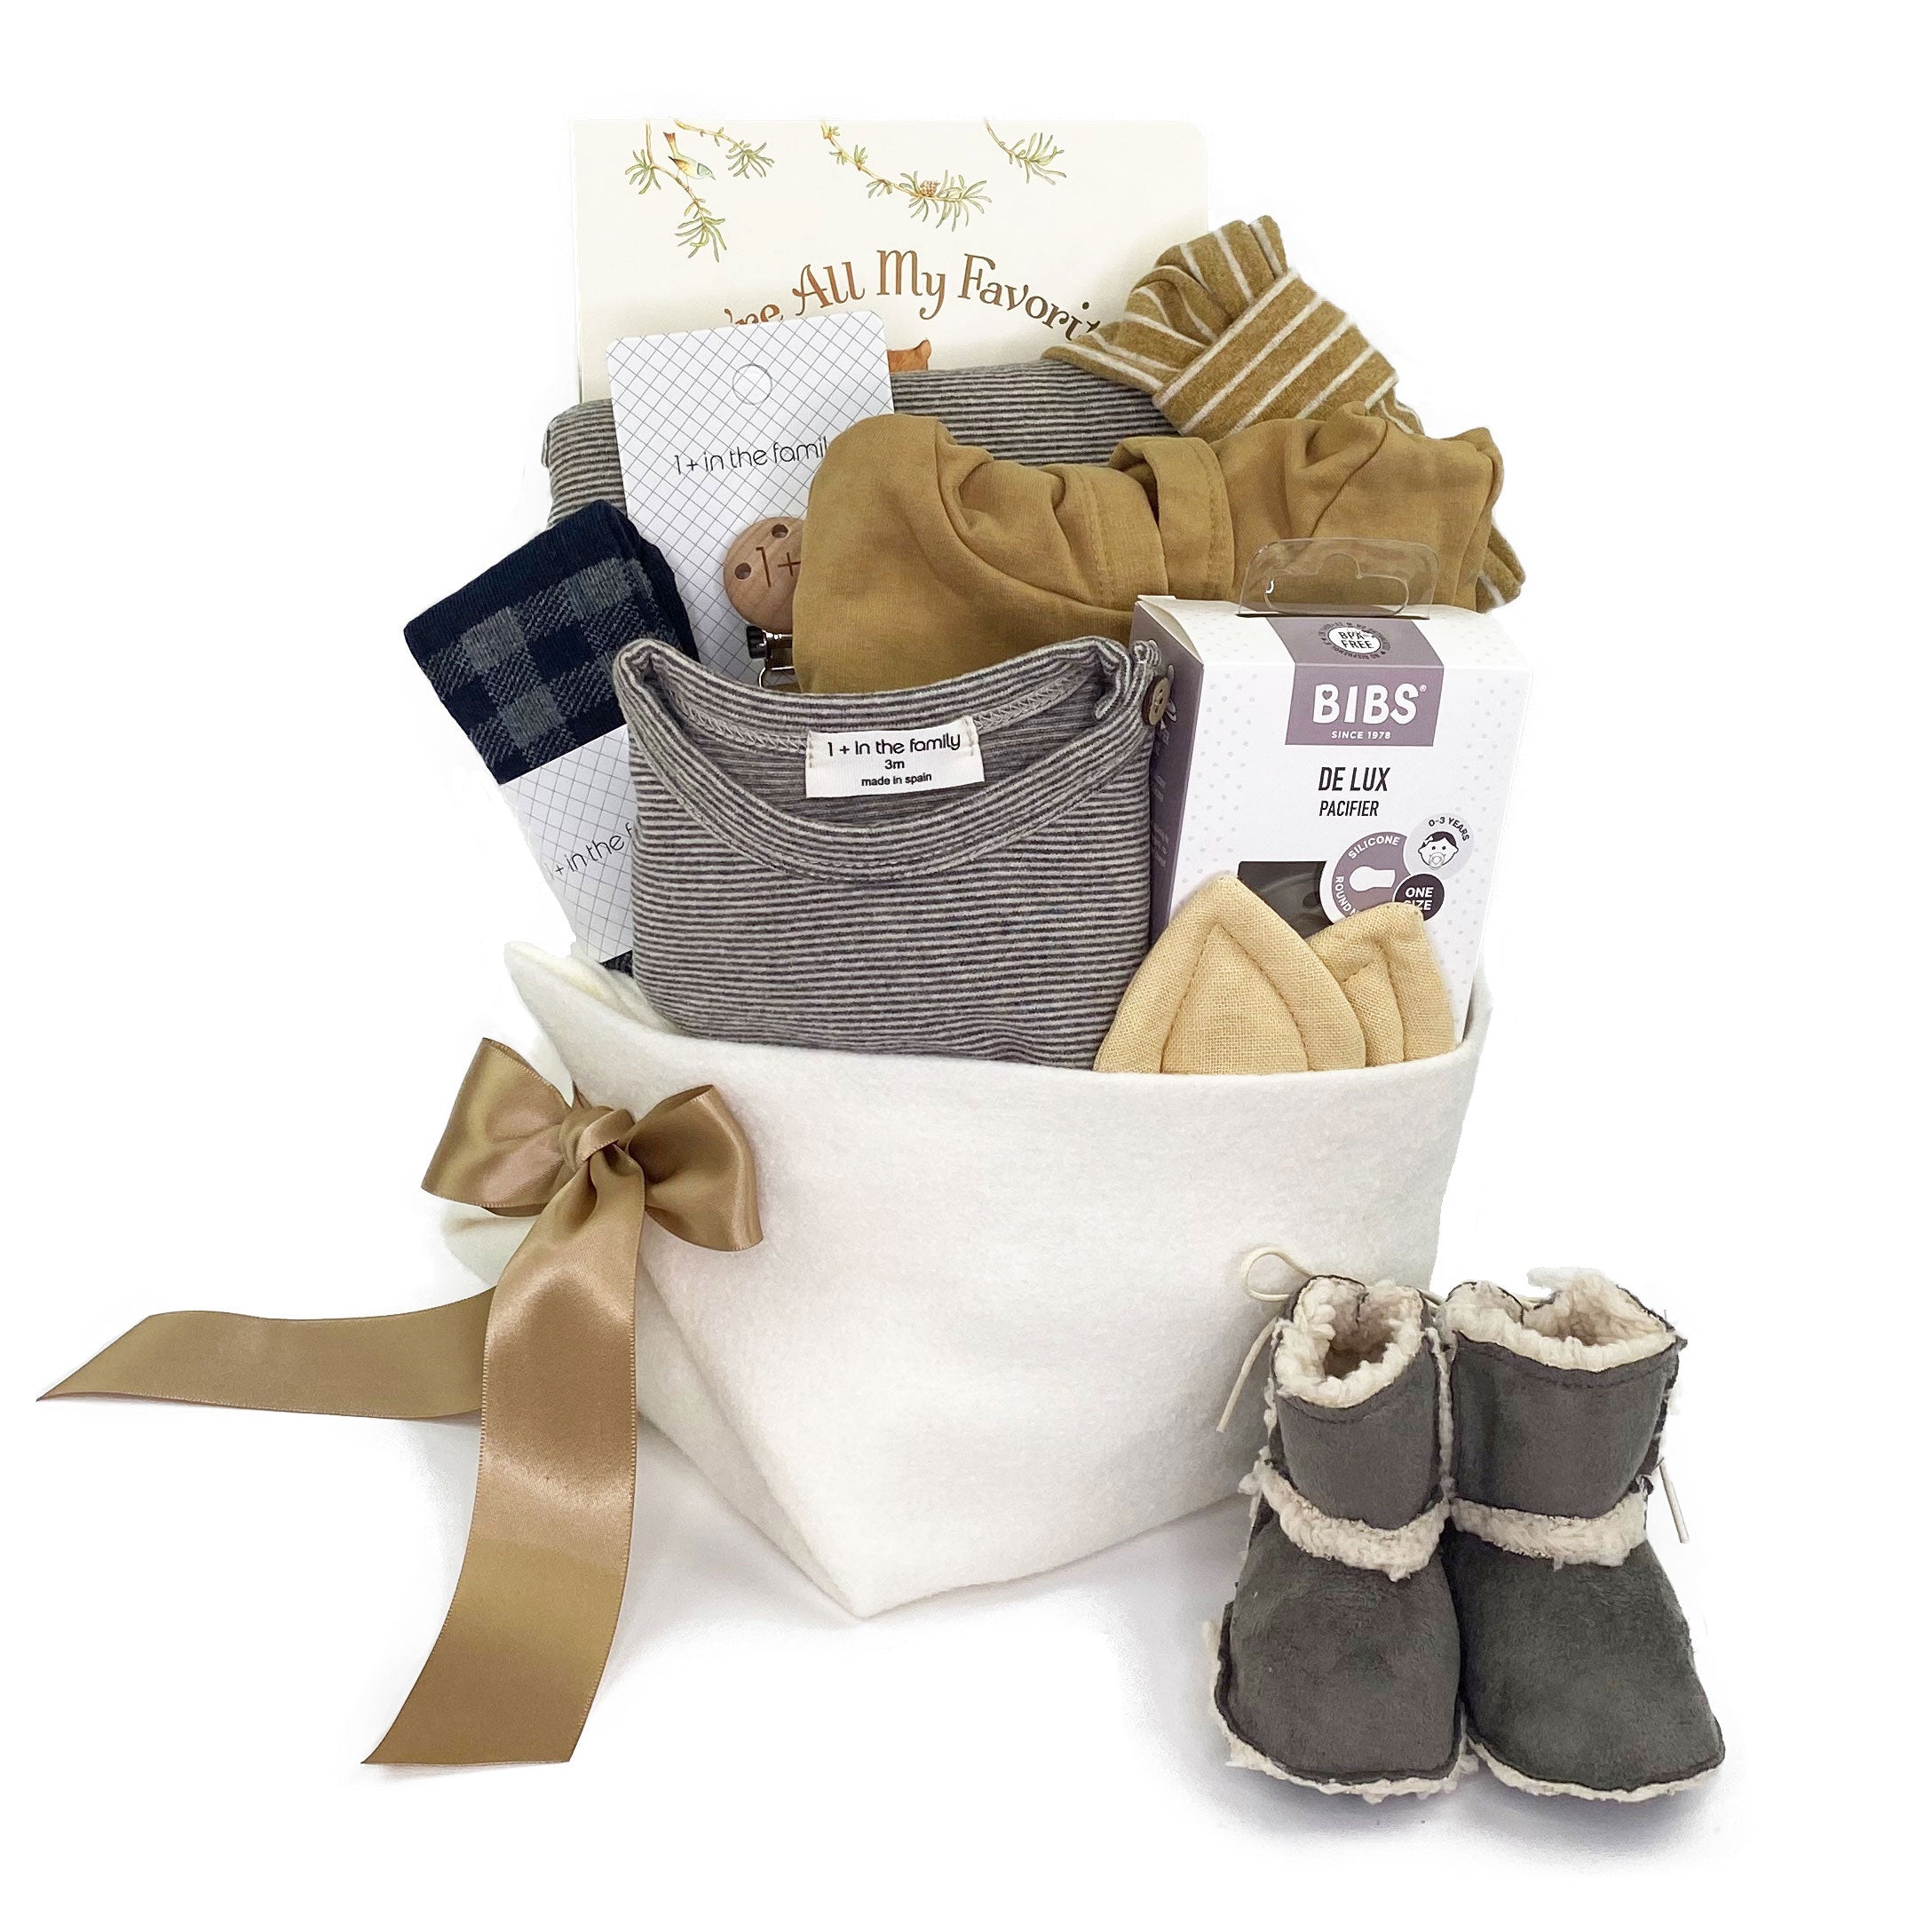 Luxury Baby Girl Gift Basket featuring 1+ in the Family in beautiful mustard and grey colours